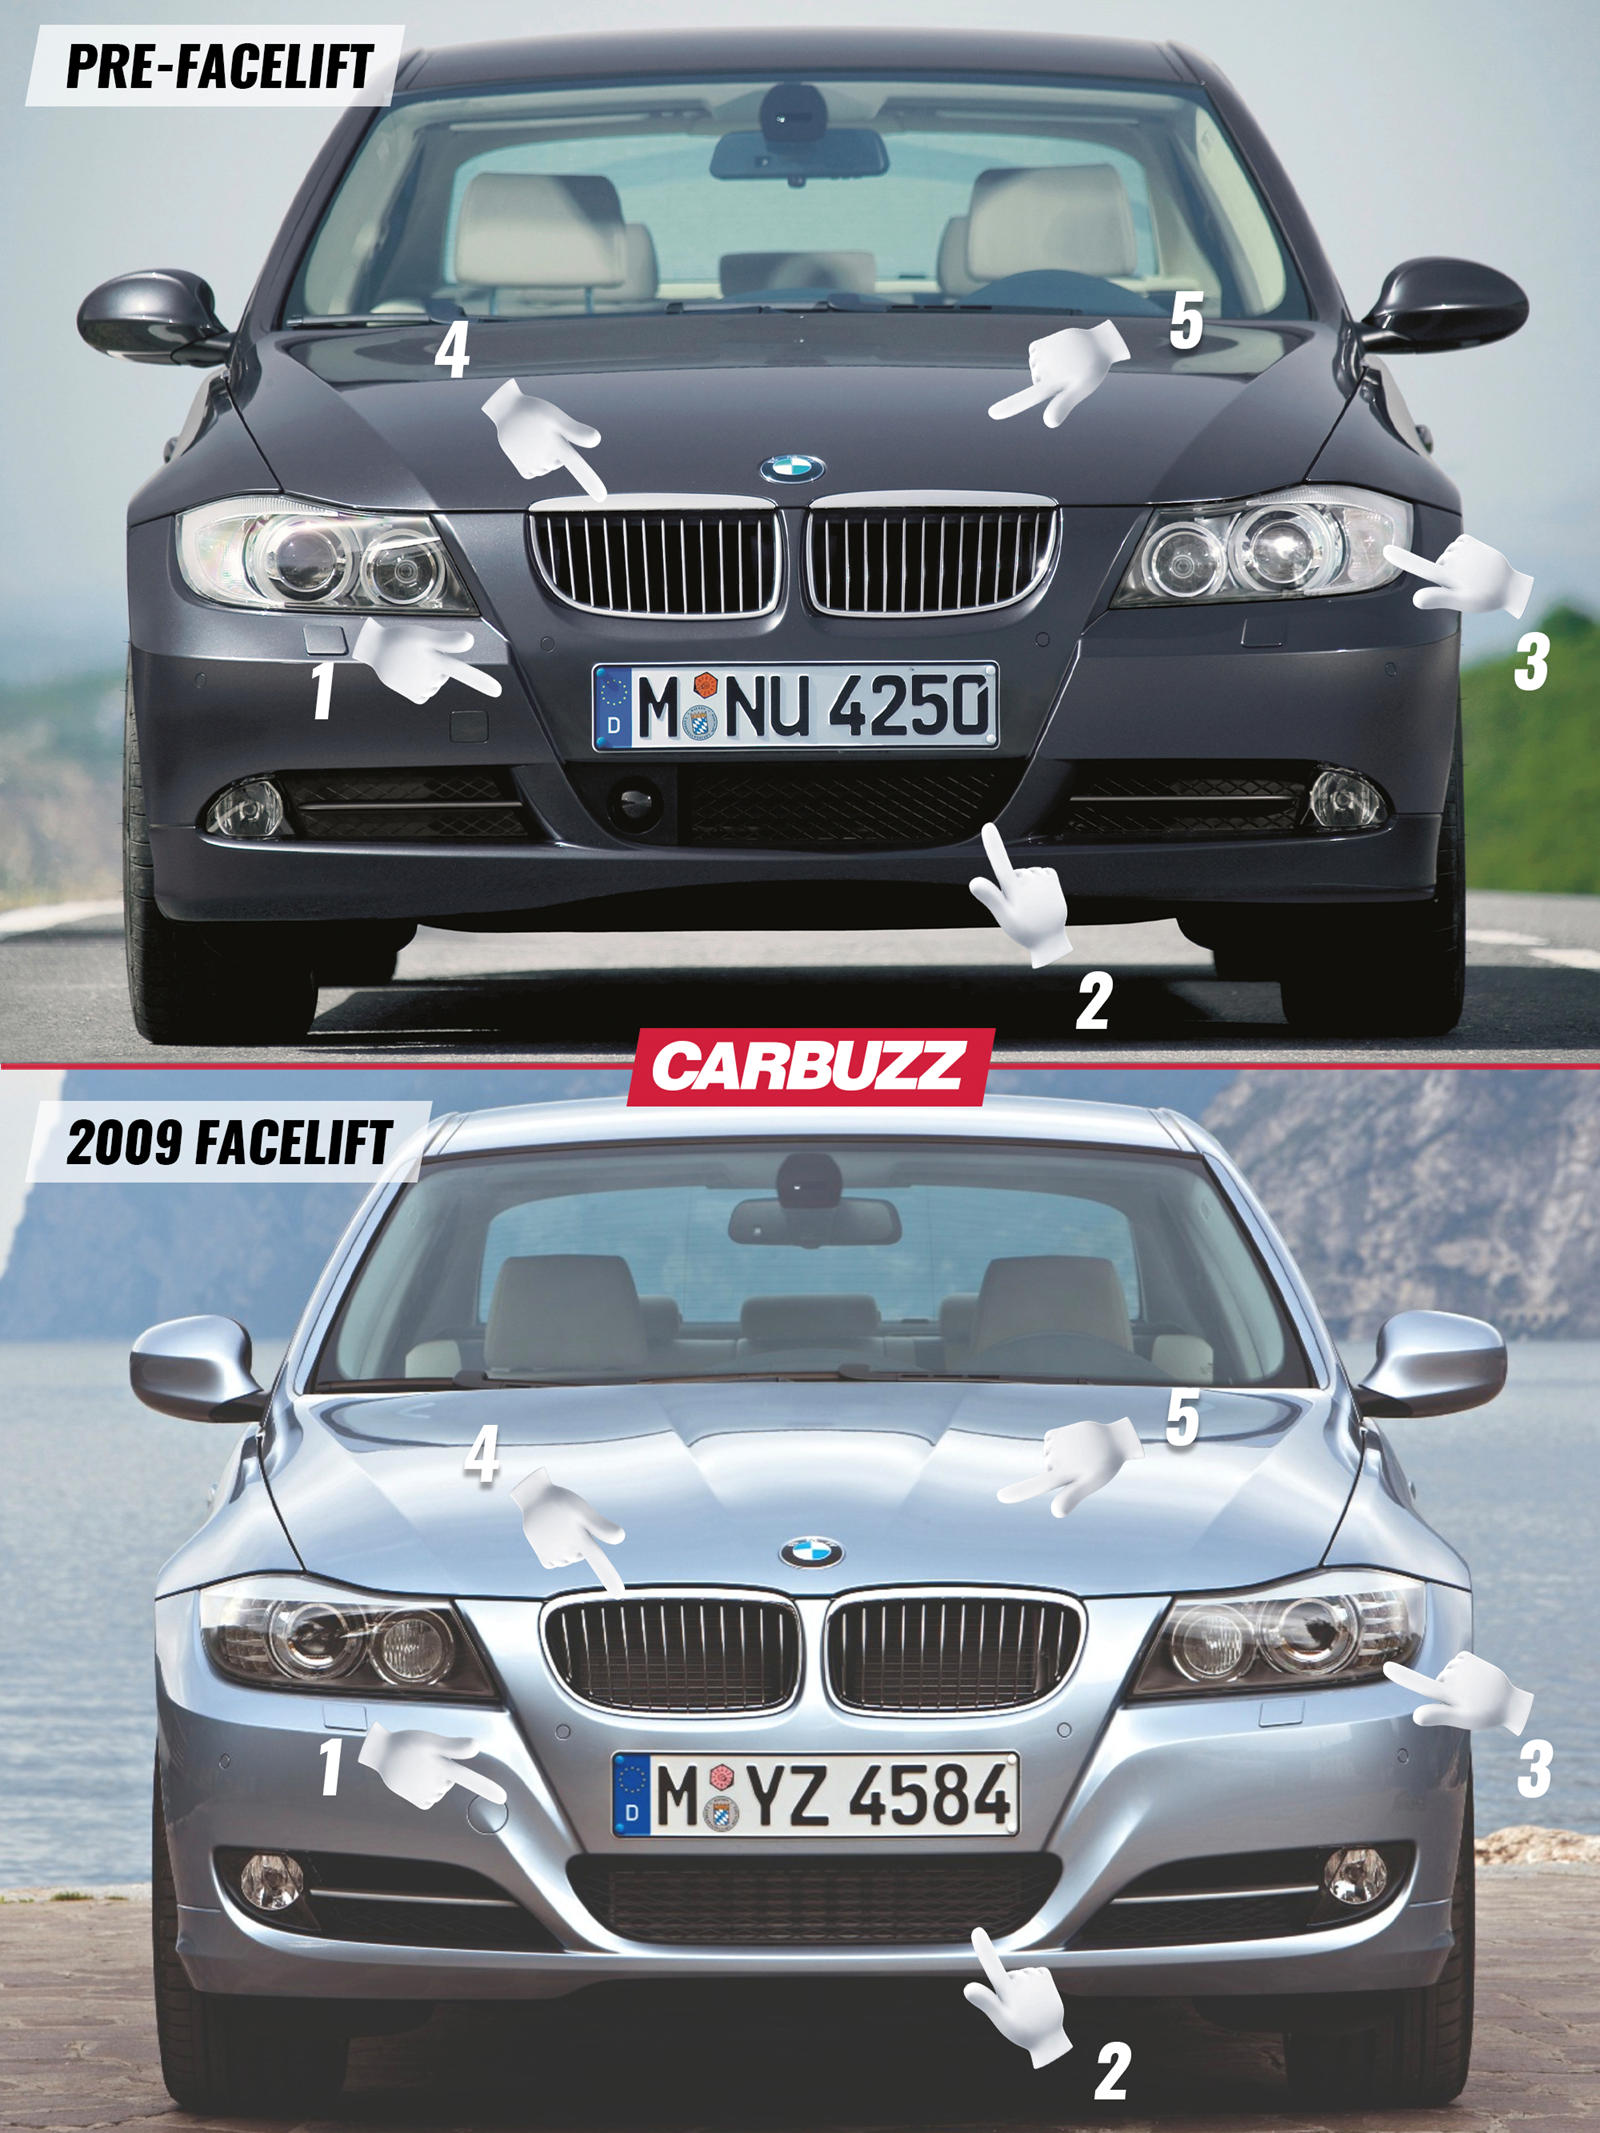 2011 BMW 1-series Updated with Single-Turbo N55 Inline-6, Dual-Clutch  Transmission